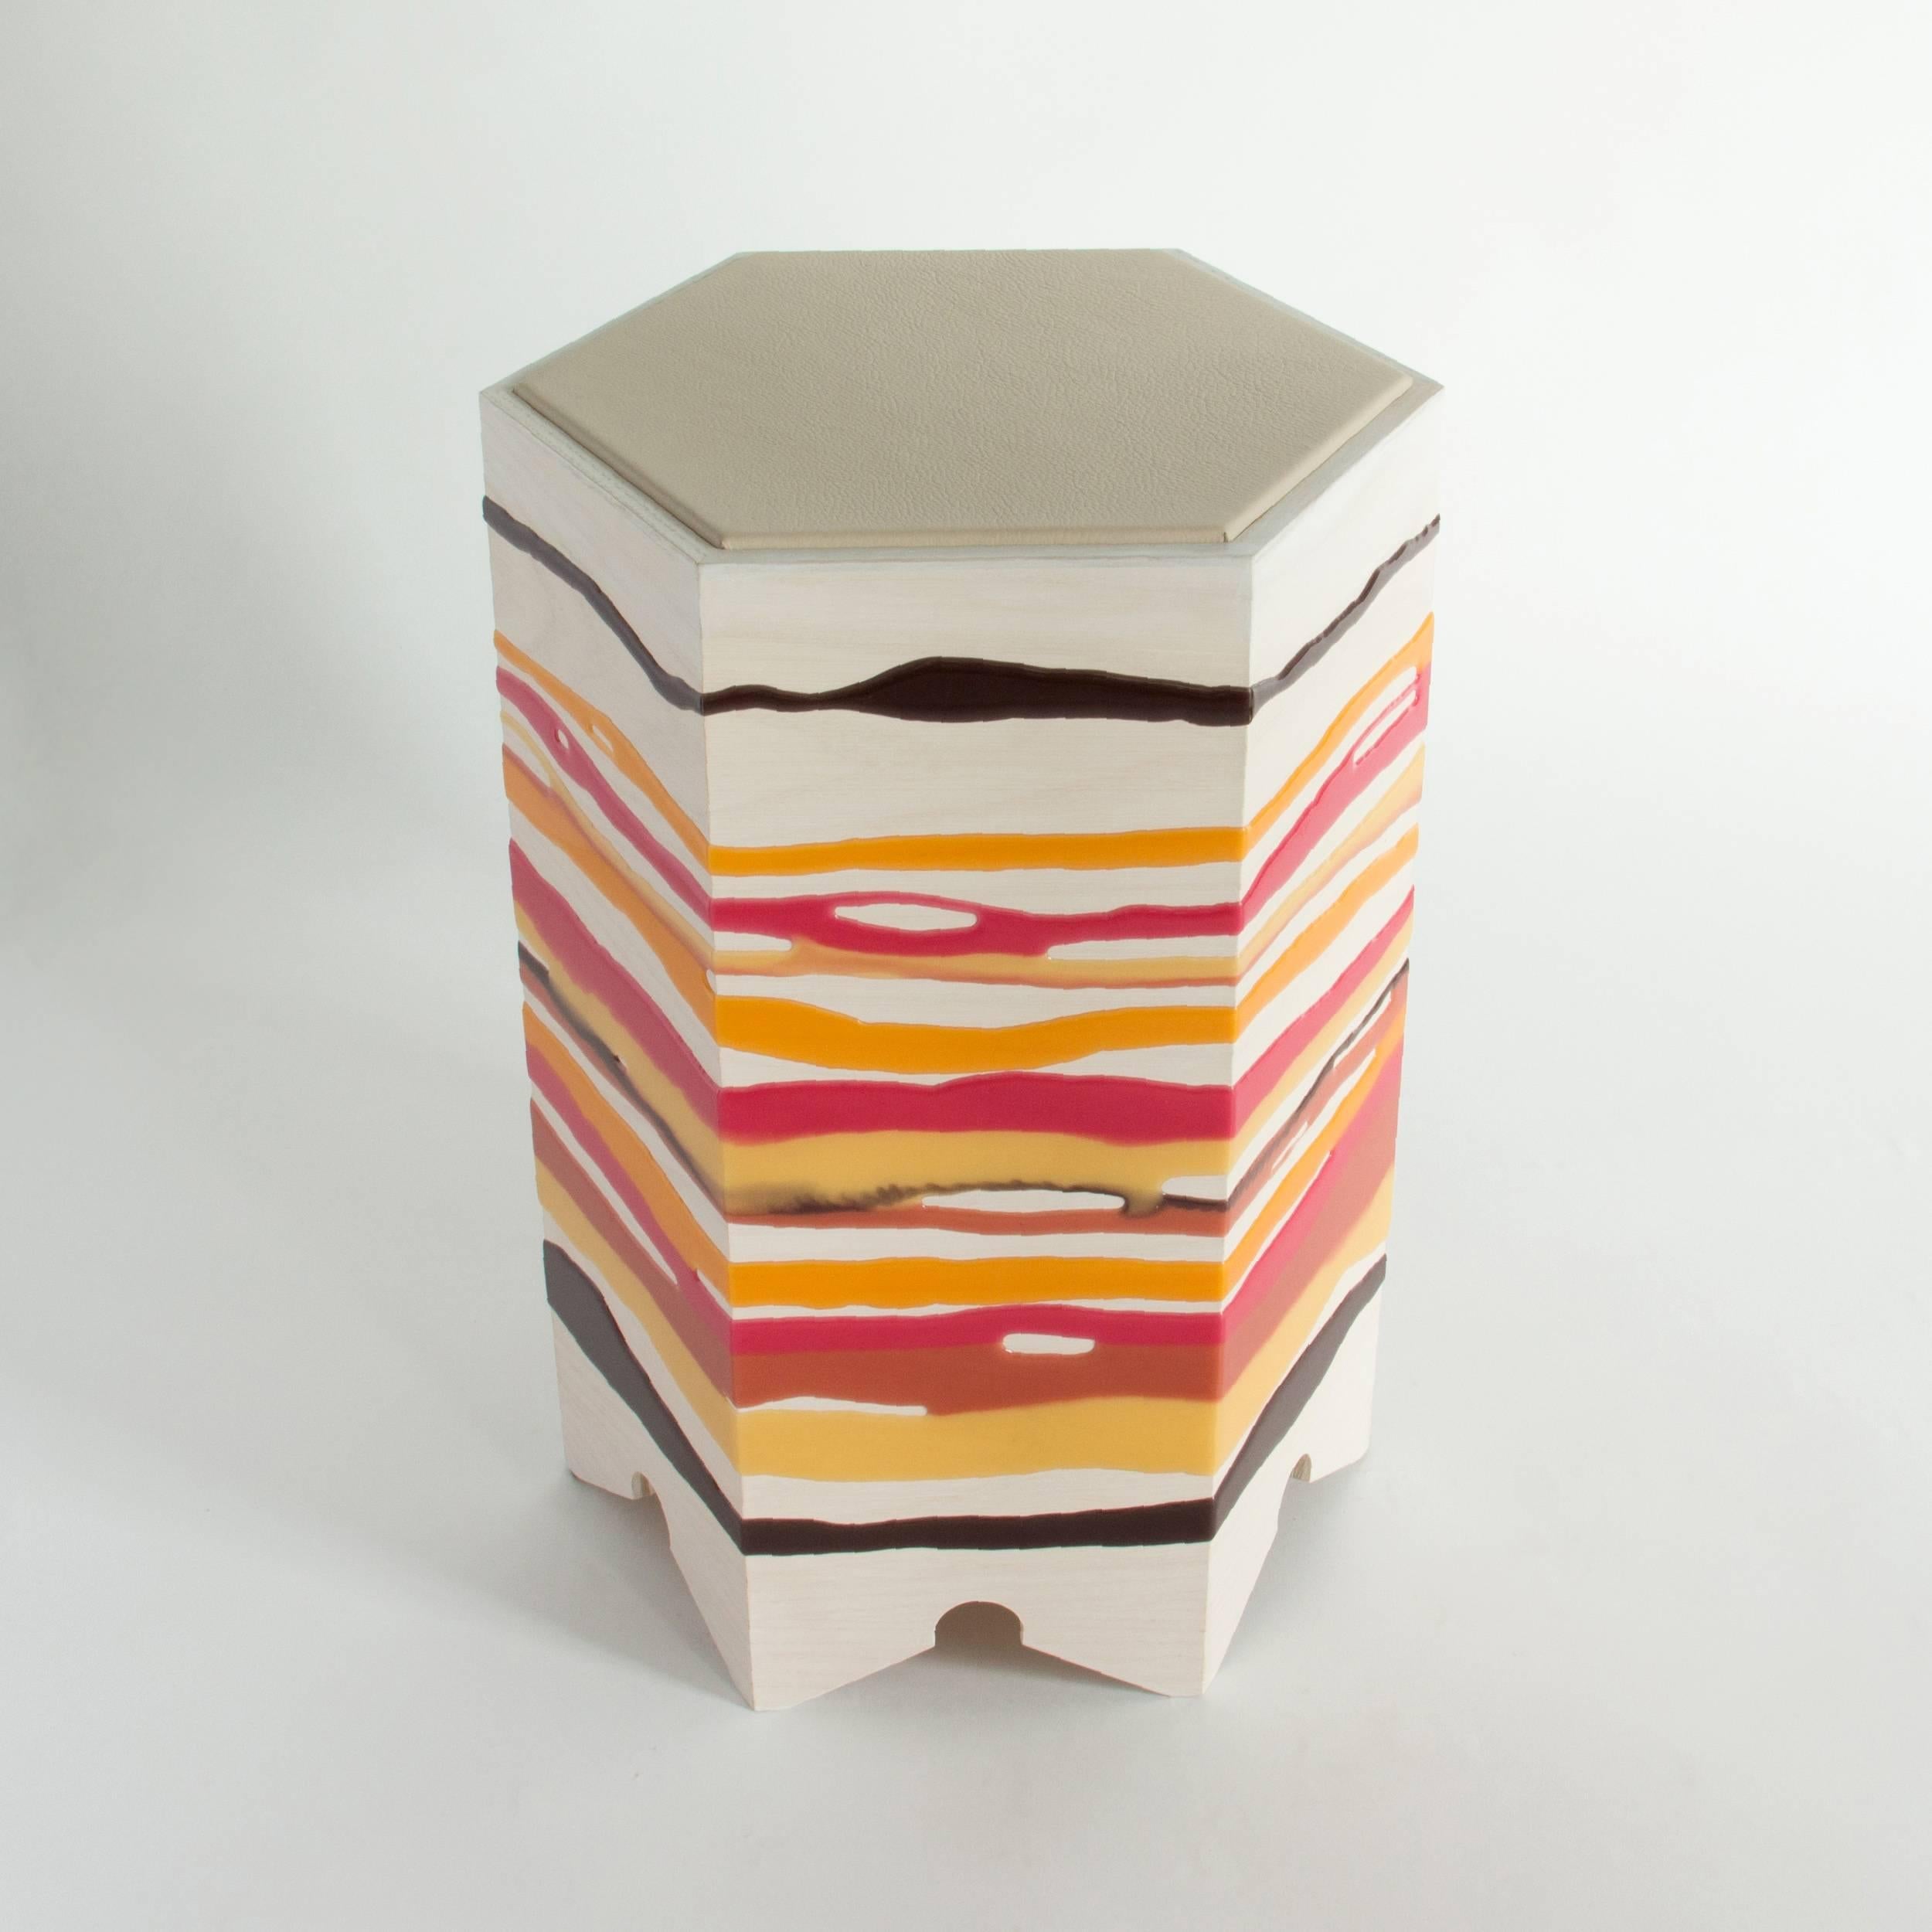 The drip or fold side table by Noble Goods is constructed of a single sheet of ash plywood that has been hand-dripped with liquid resin, then bent into a hexagonal shape. Finished with a leather upholstered top. The hot colors of this piece are